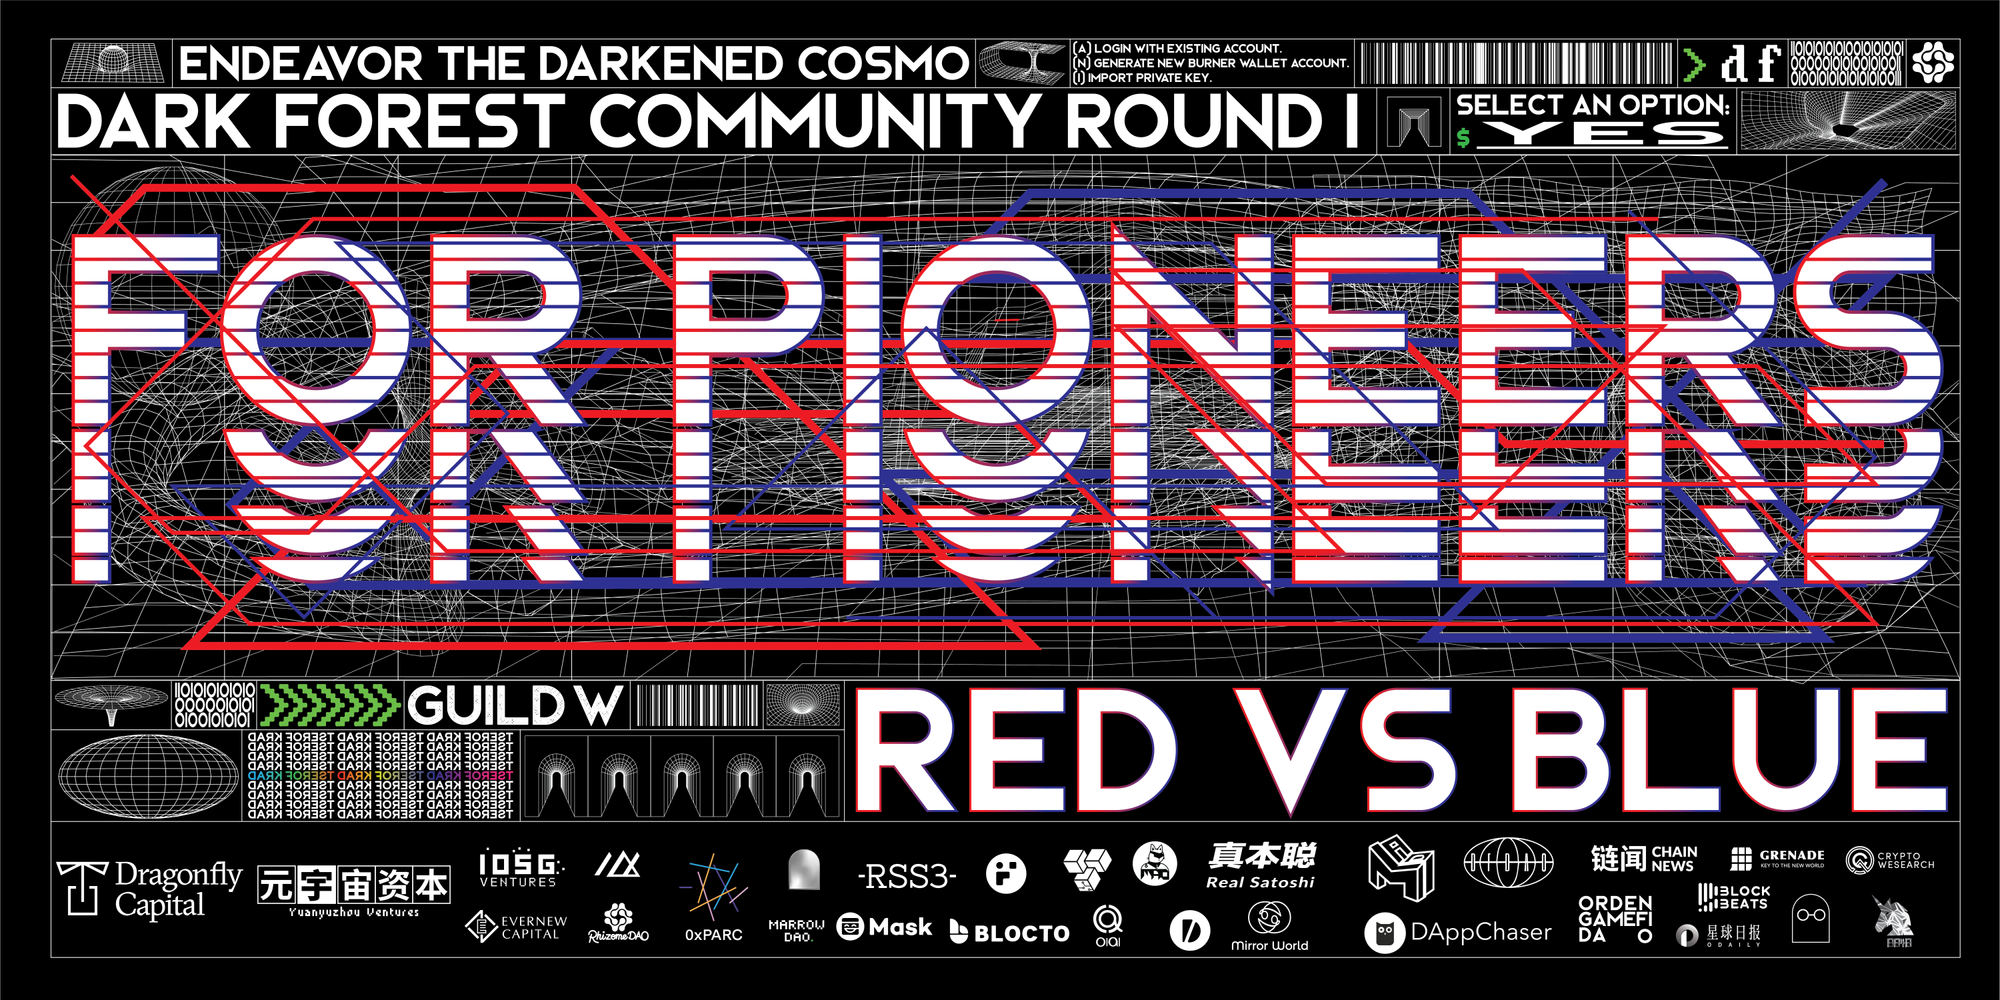 Promo image for the 'For Pioneers' Red vs Blue Dark Forest community round 